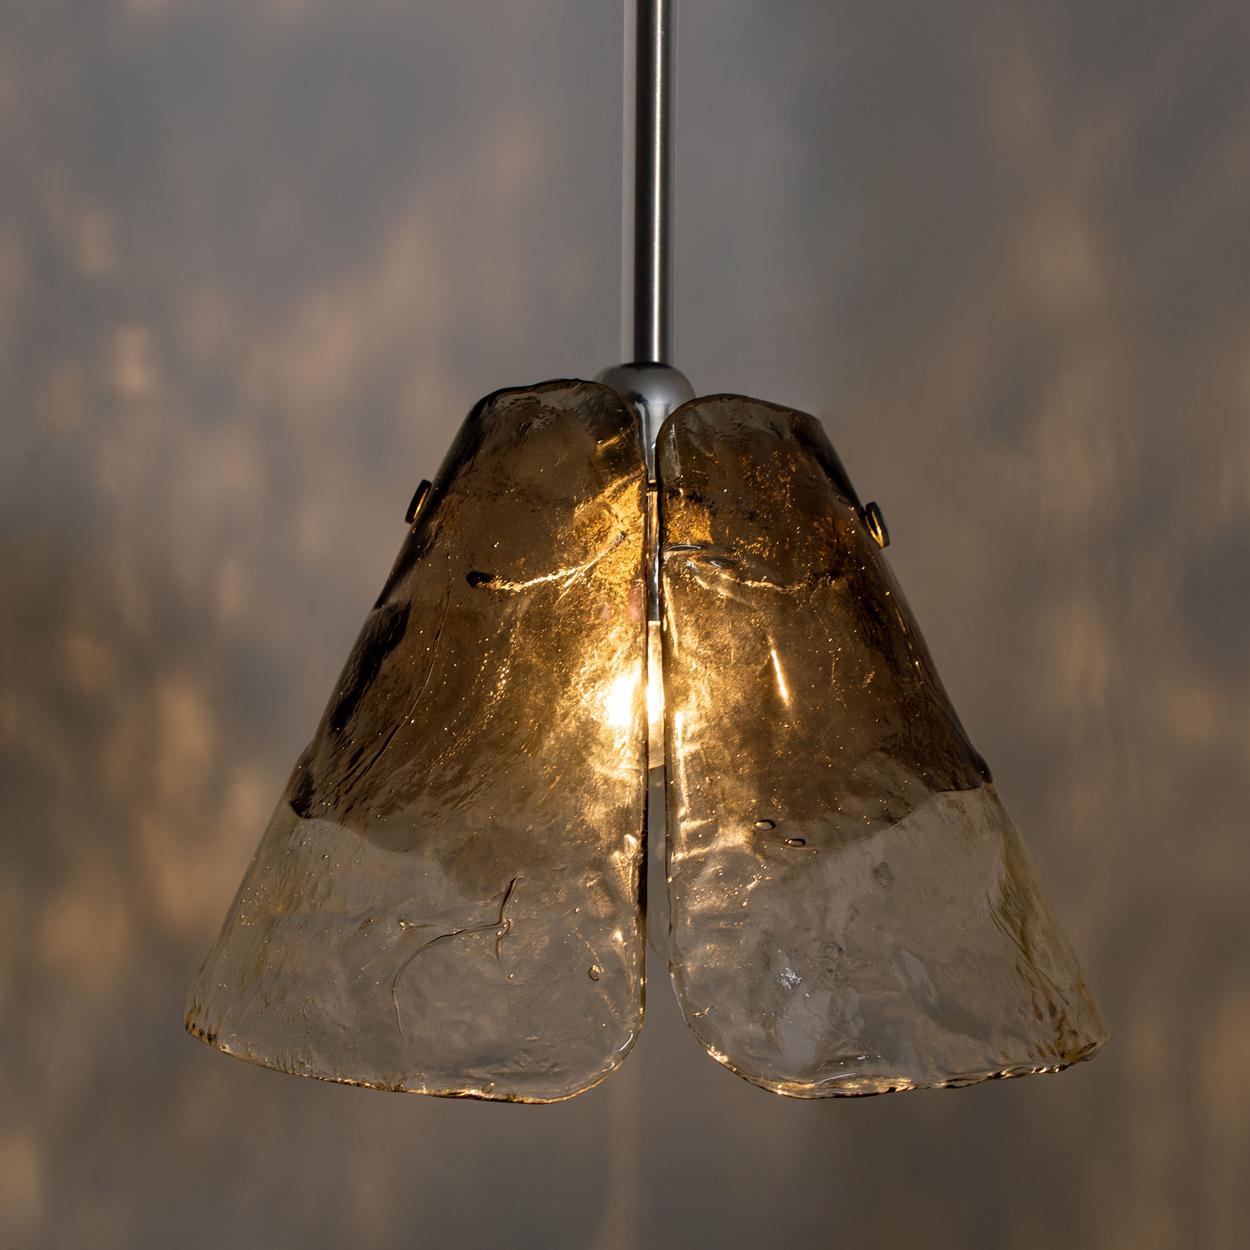 1 of the 2 Pendant Lamps by Carlo Nason for Mazzega 3